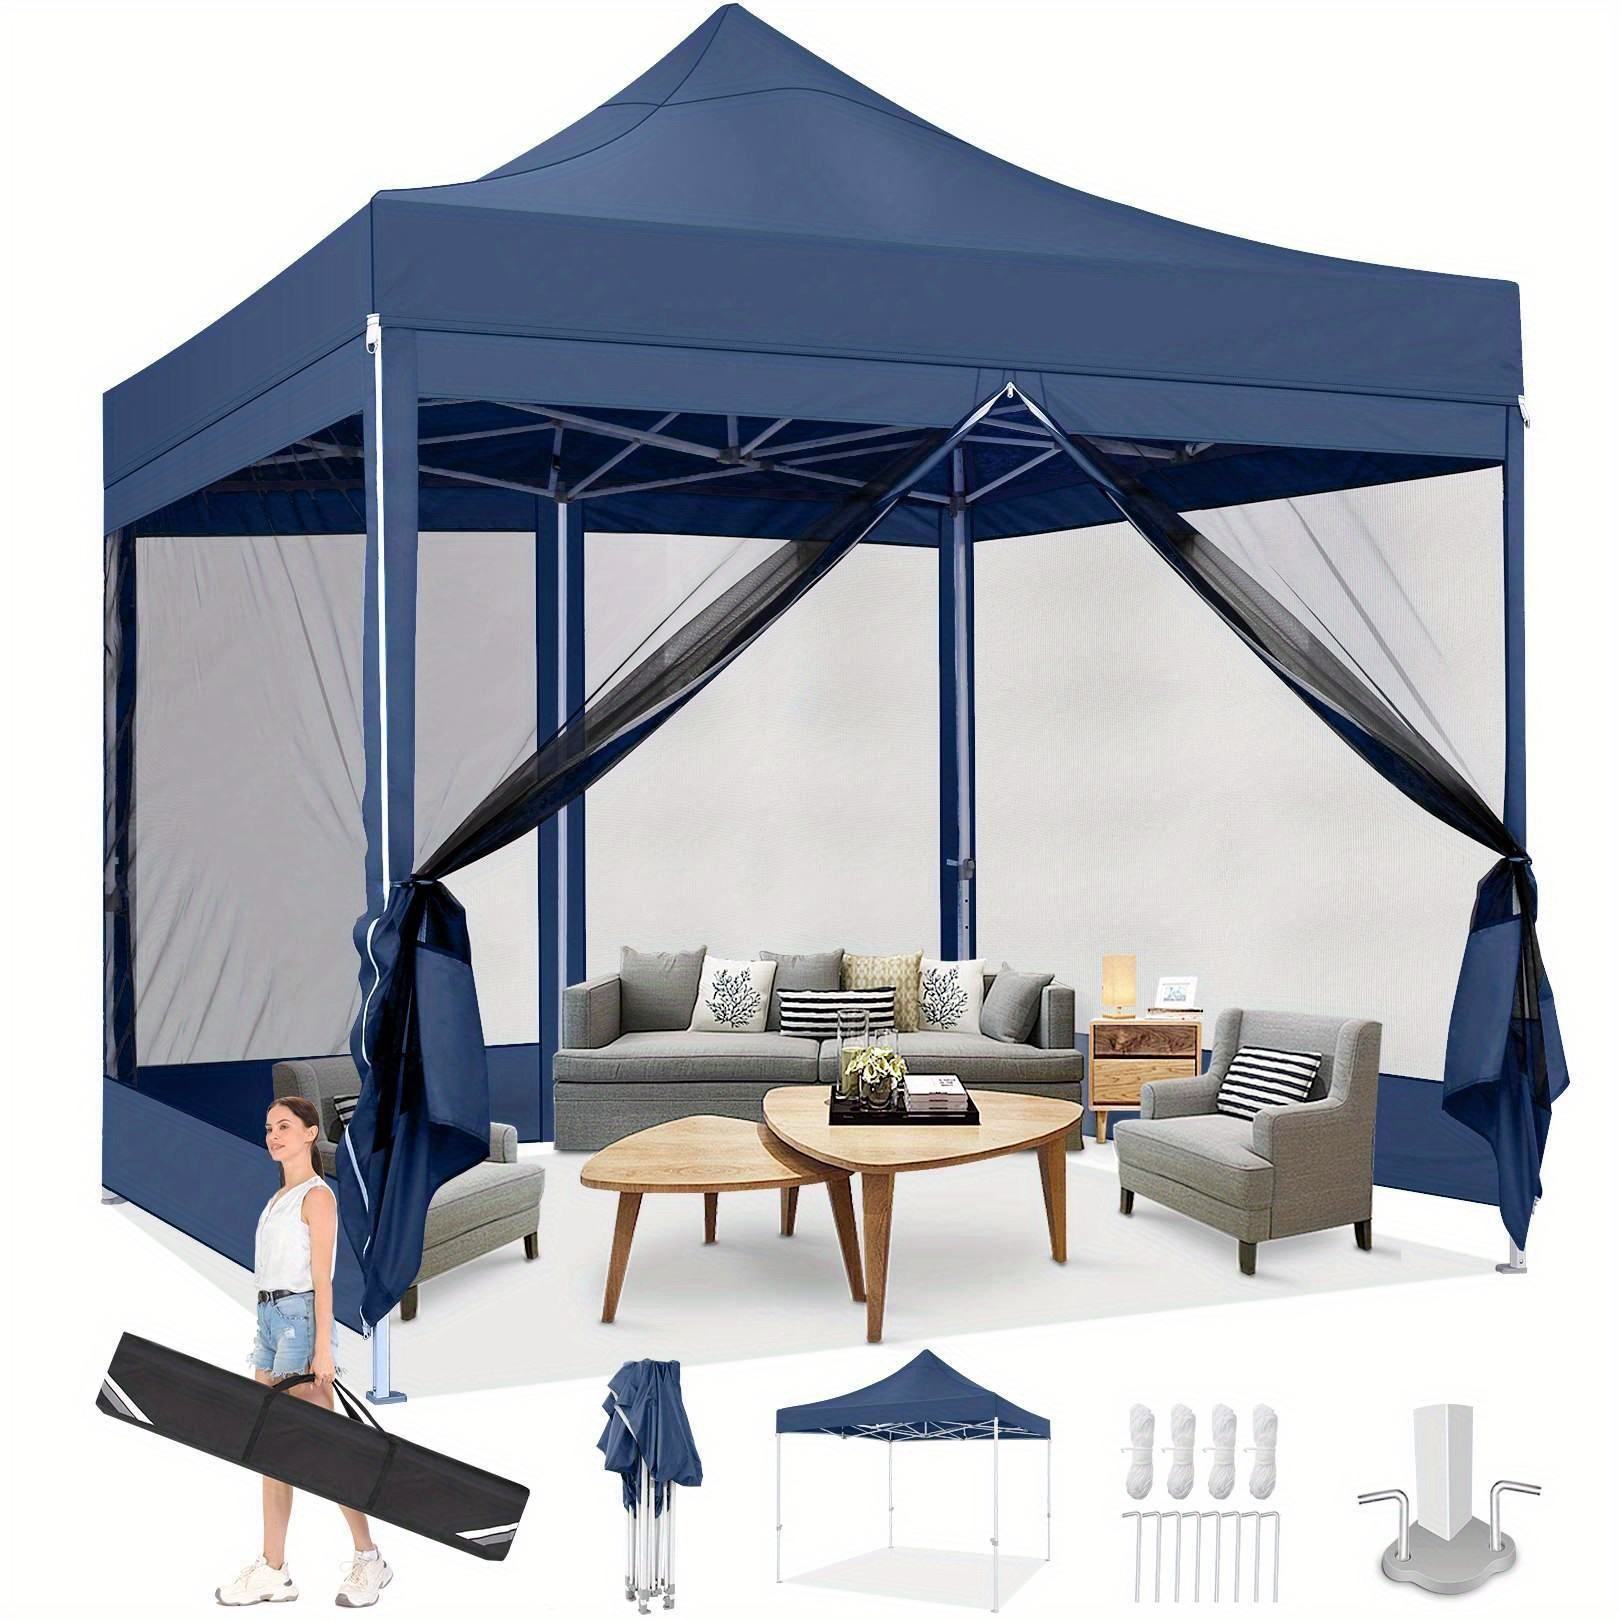 

Hoteel 10x10ft Pop-up Playground Awning With Removable Side Wall And Mesh, Waterproof Stability, Uv Protection, With Tote Bag, Suitable For Outdoor Use